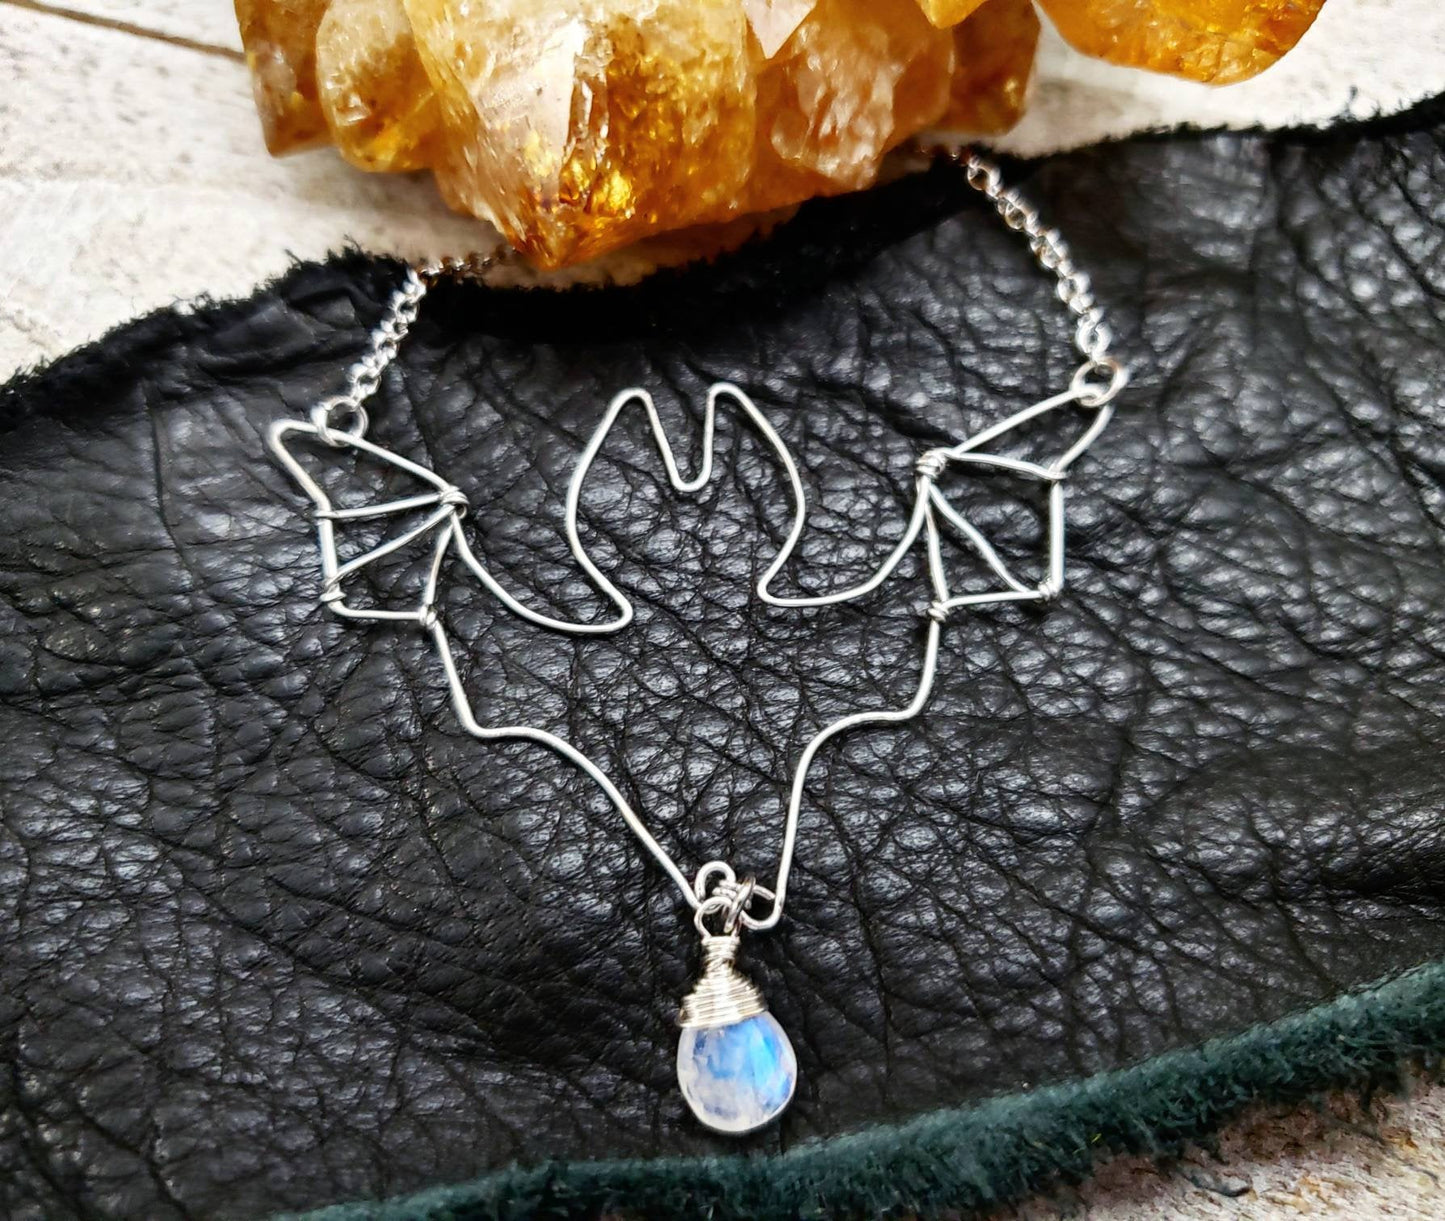 Silver wire Bat necklace